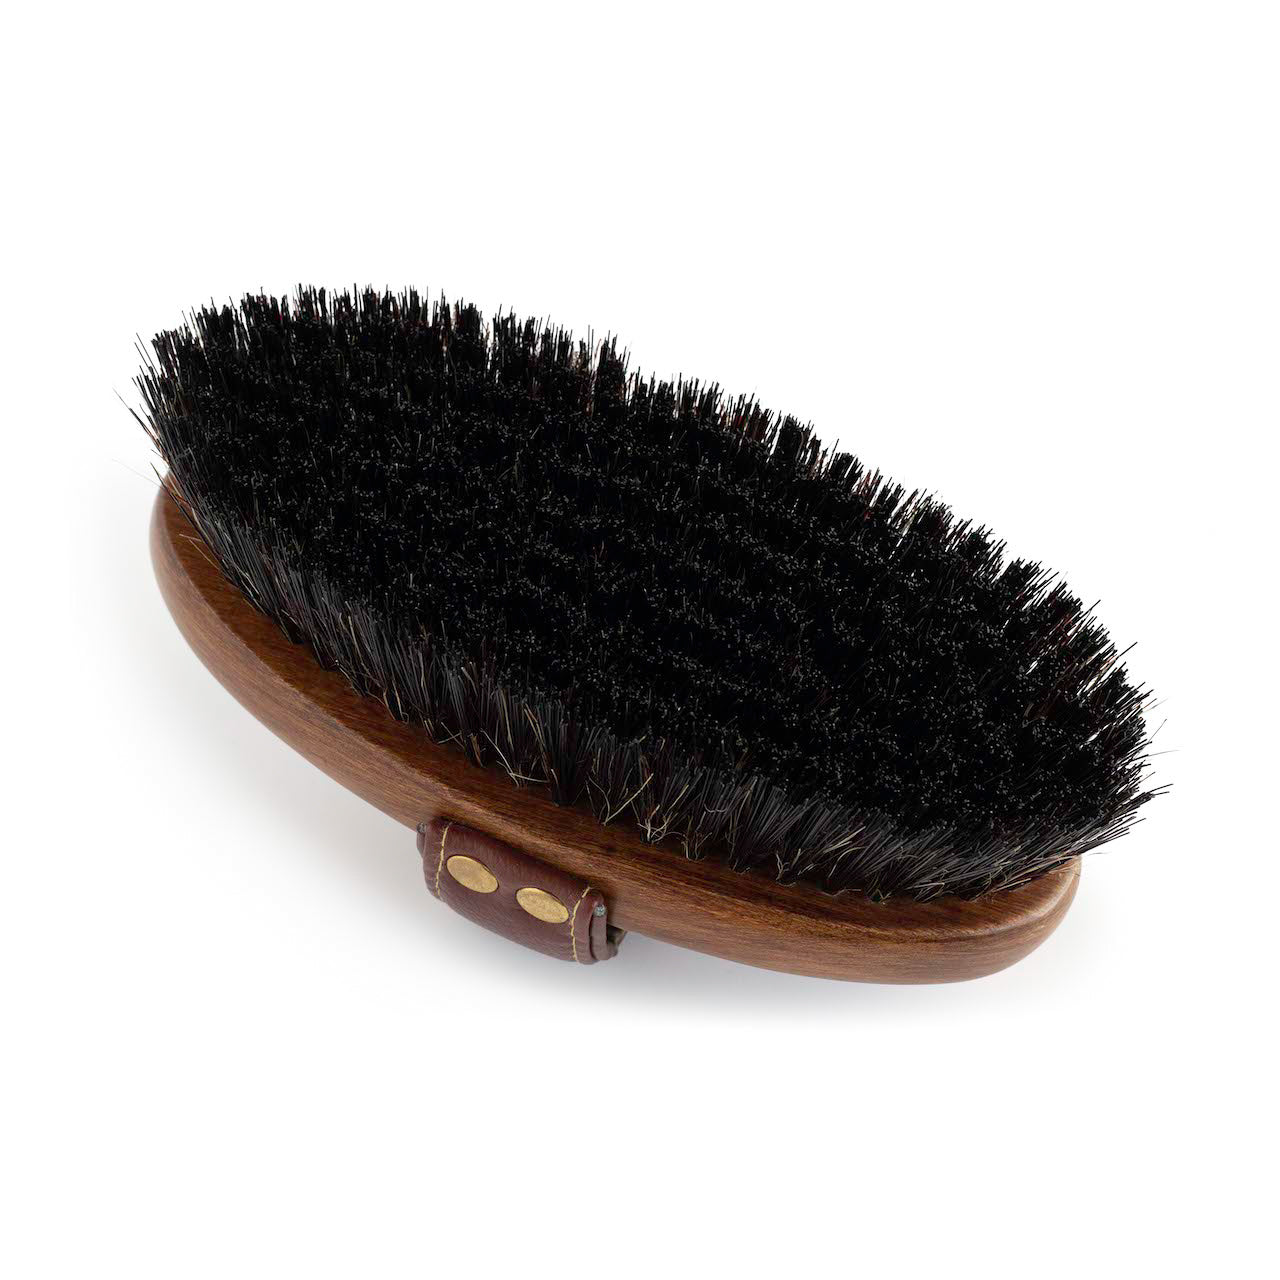 An image showing the underside of the Hairy Pony Dandy Brush. You can see the black bristles, beechwood material and gold detailing on the handle. 